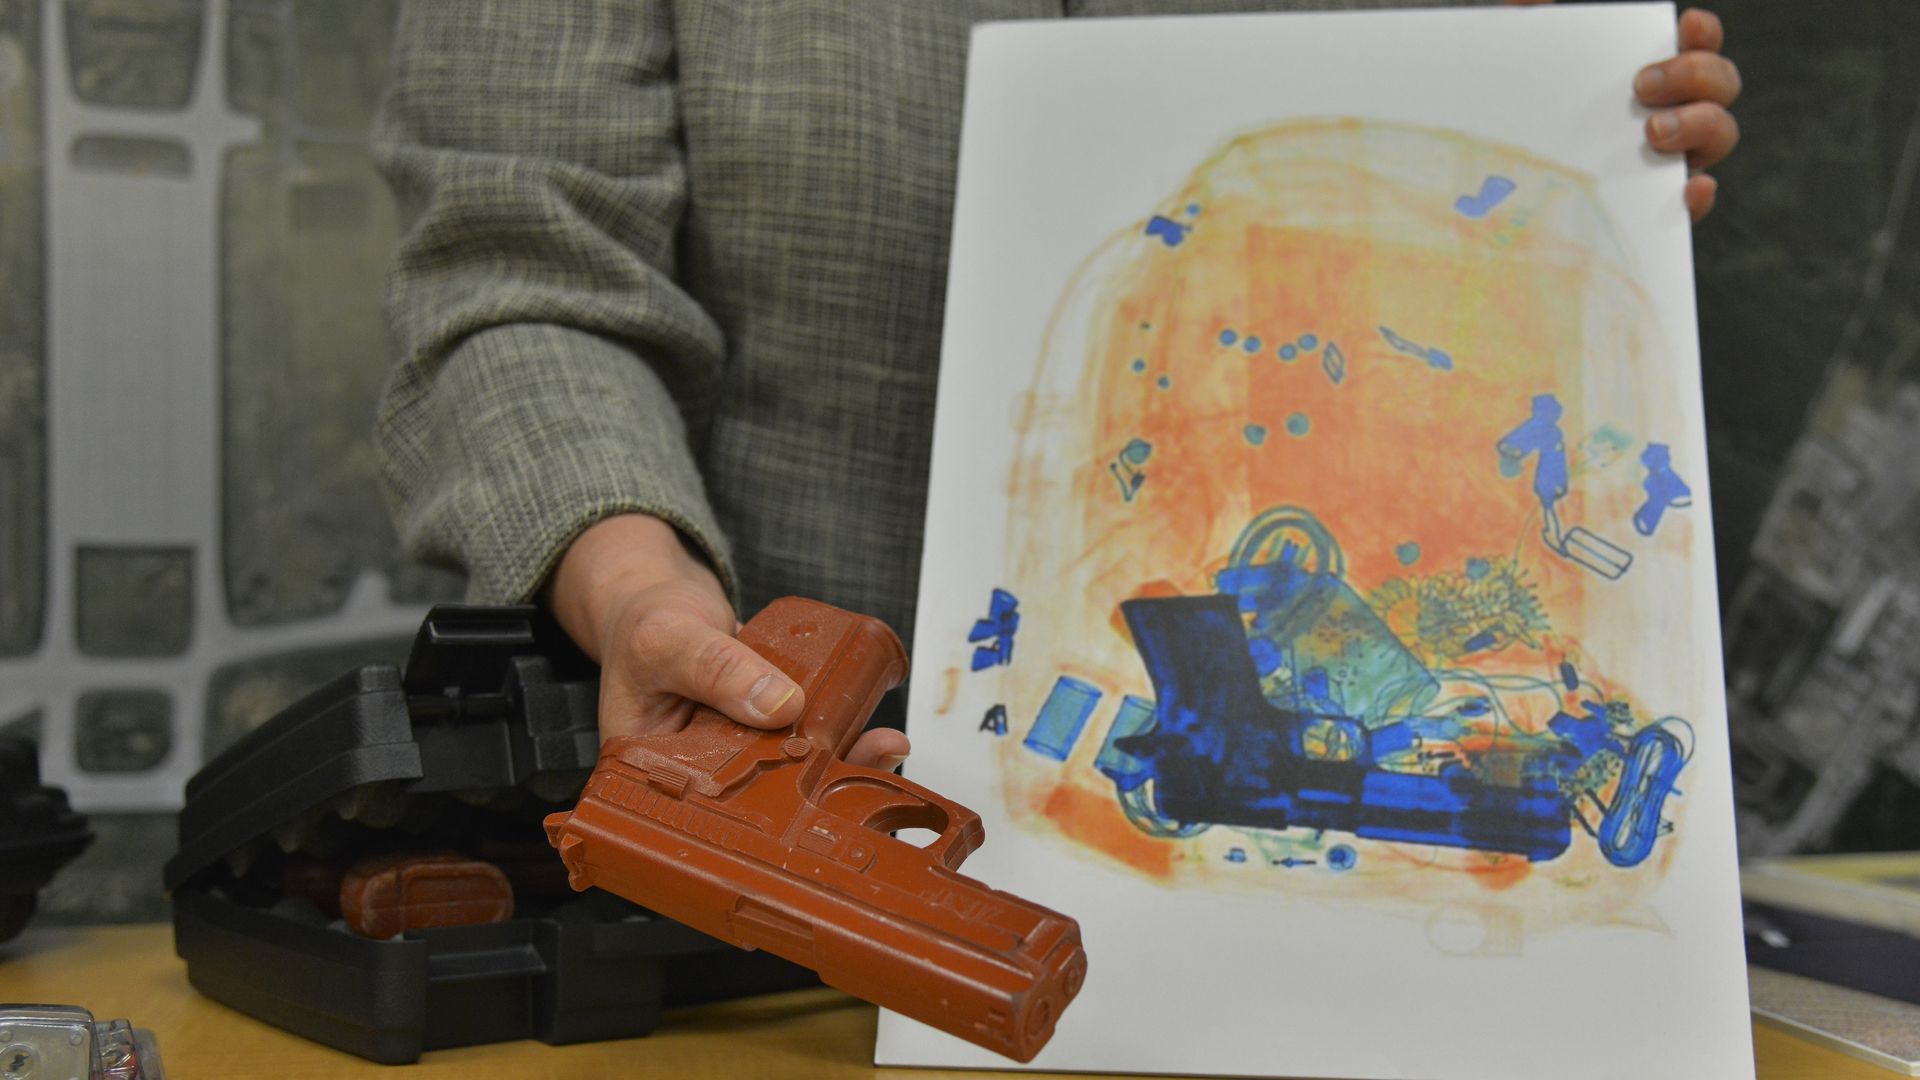 An X-ray image of a gun-shaped object in a bag and someone holding a model gun